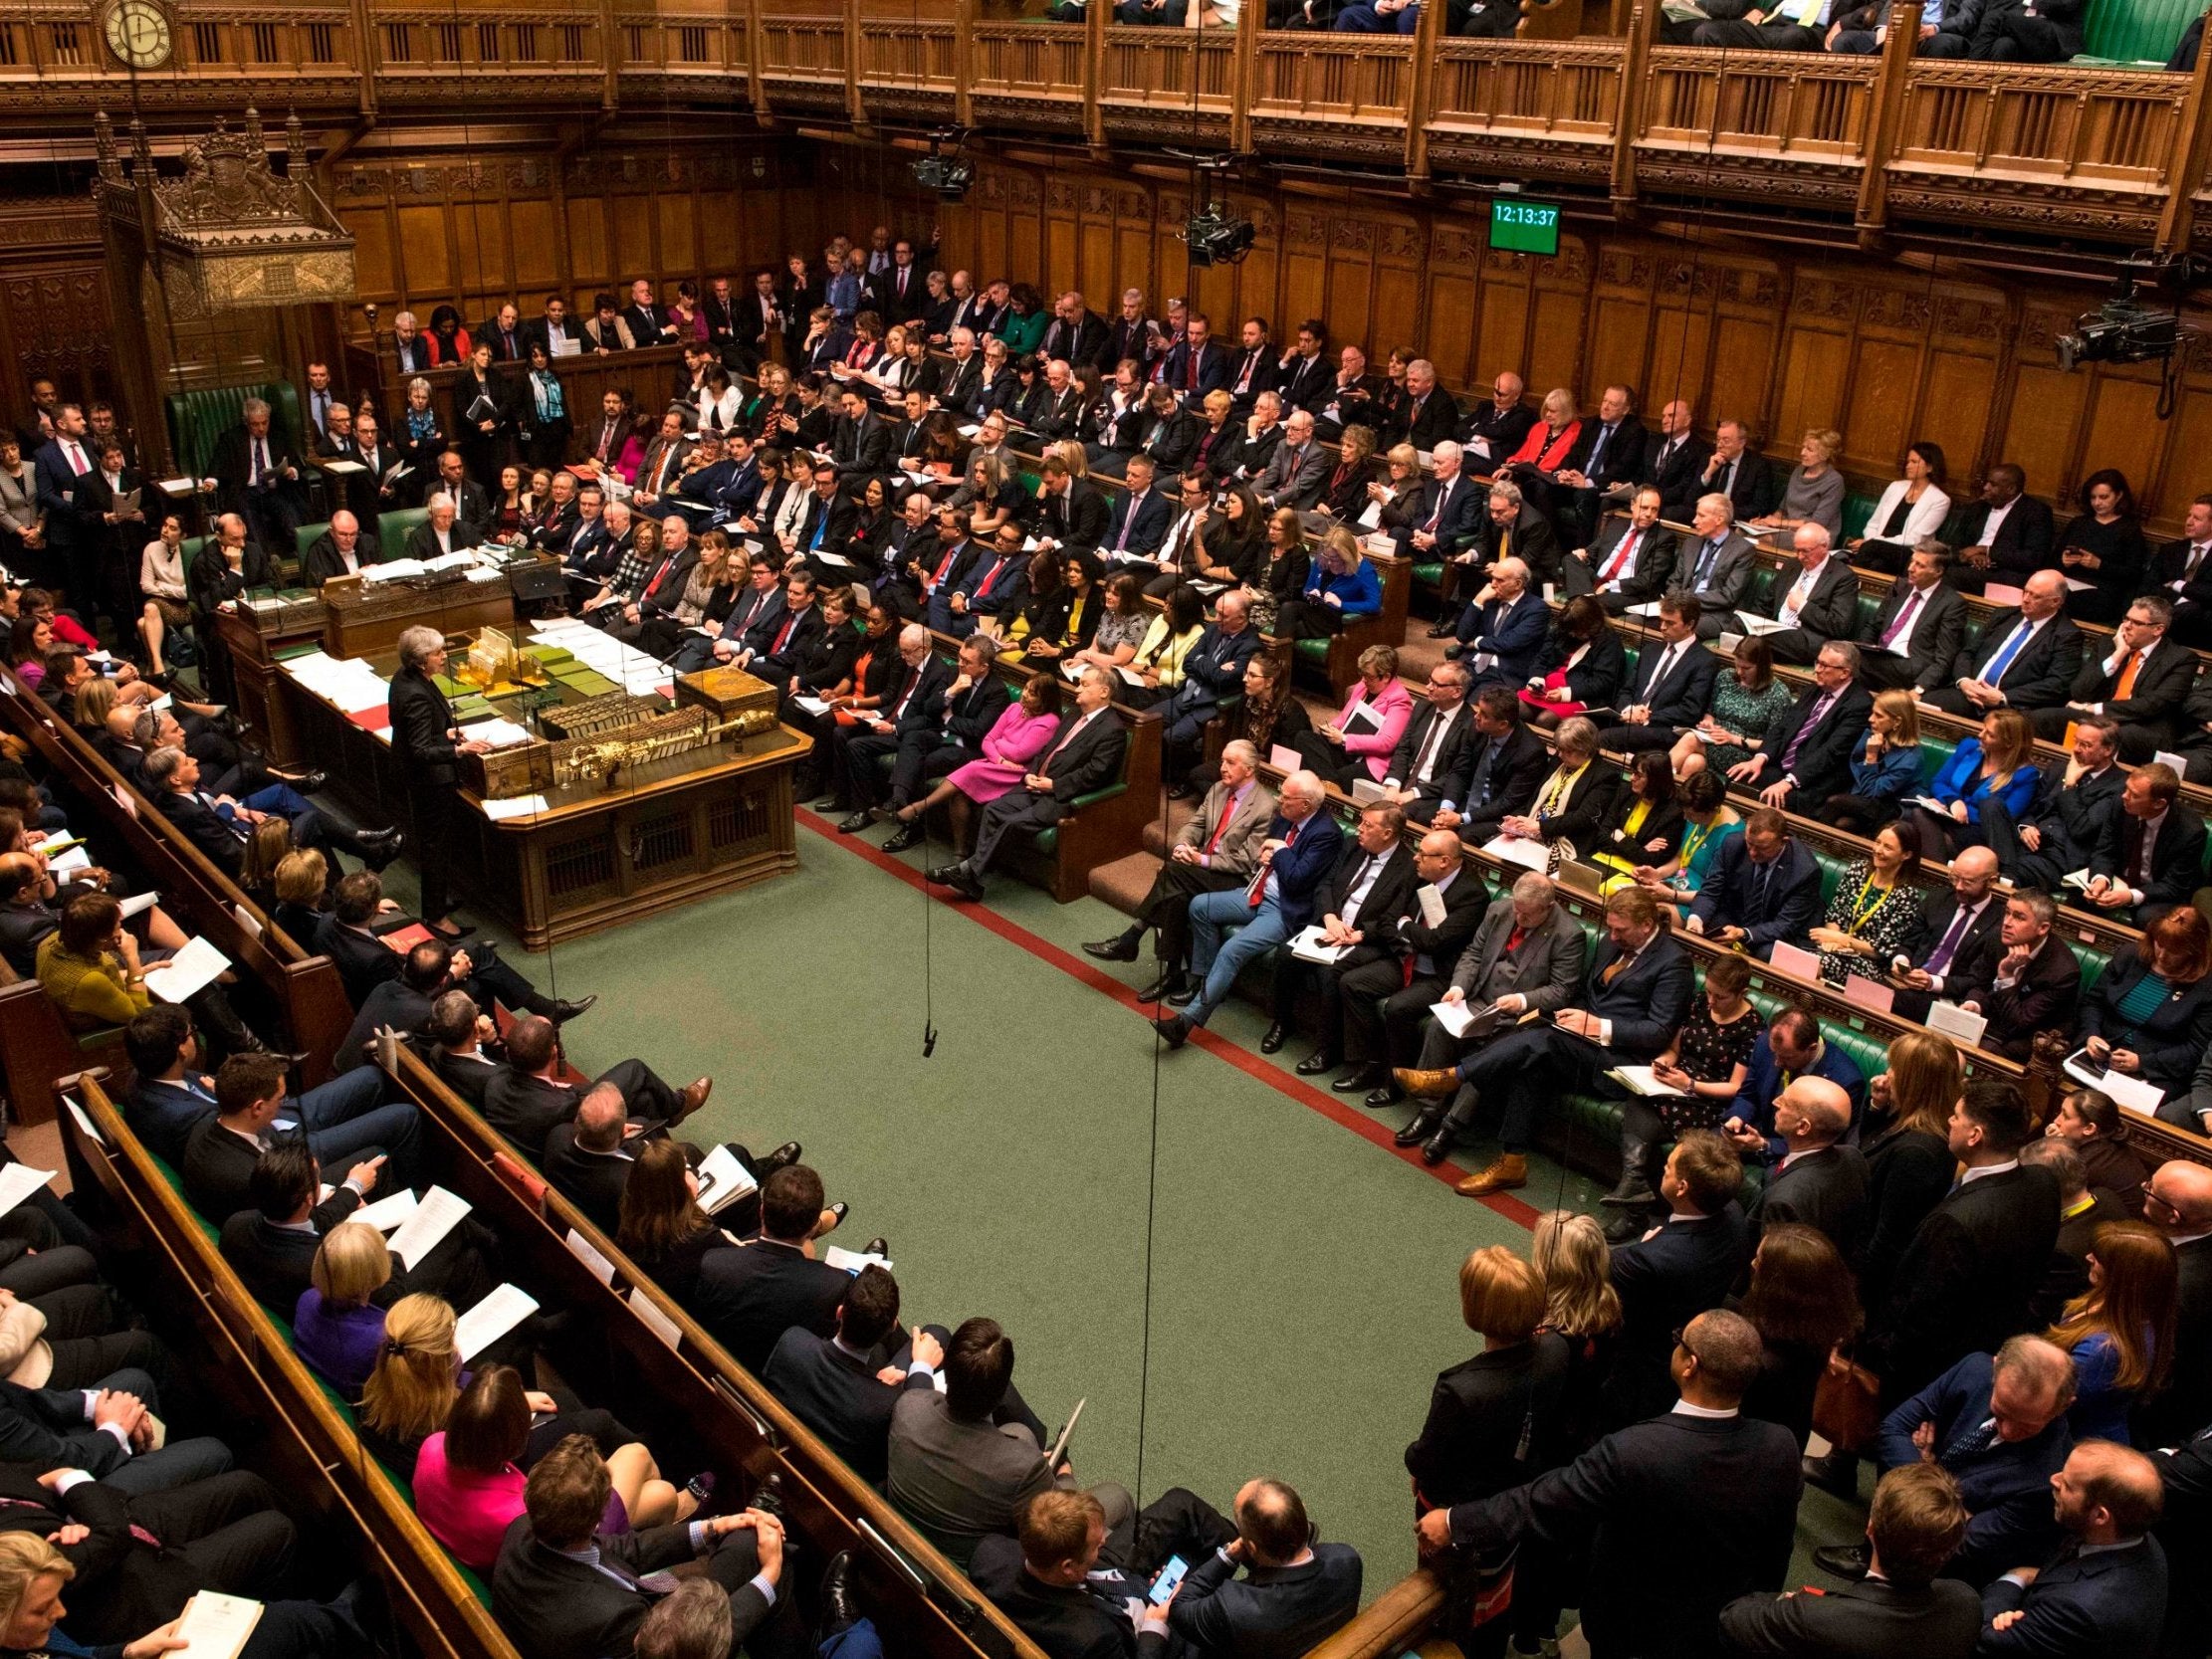 Can the House of Commons possibly agree on anything when it comes to Brexit?